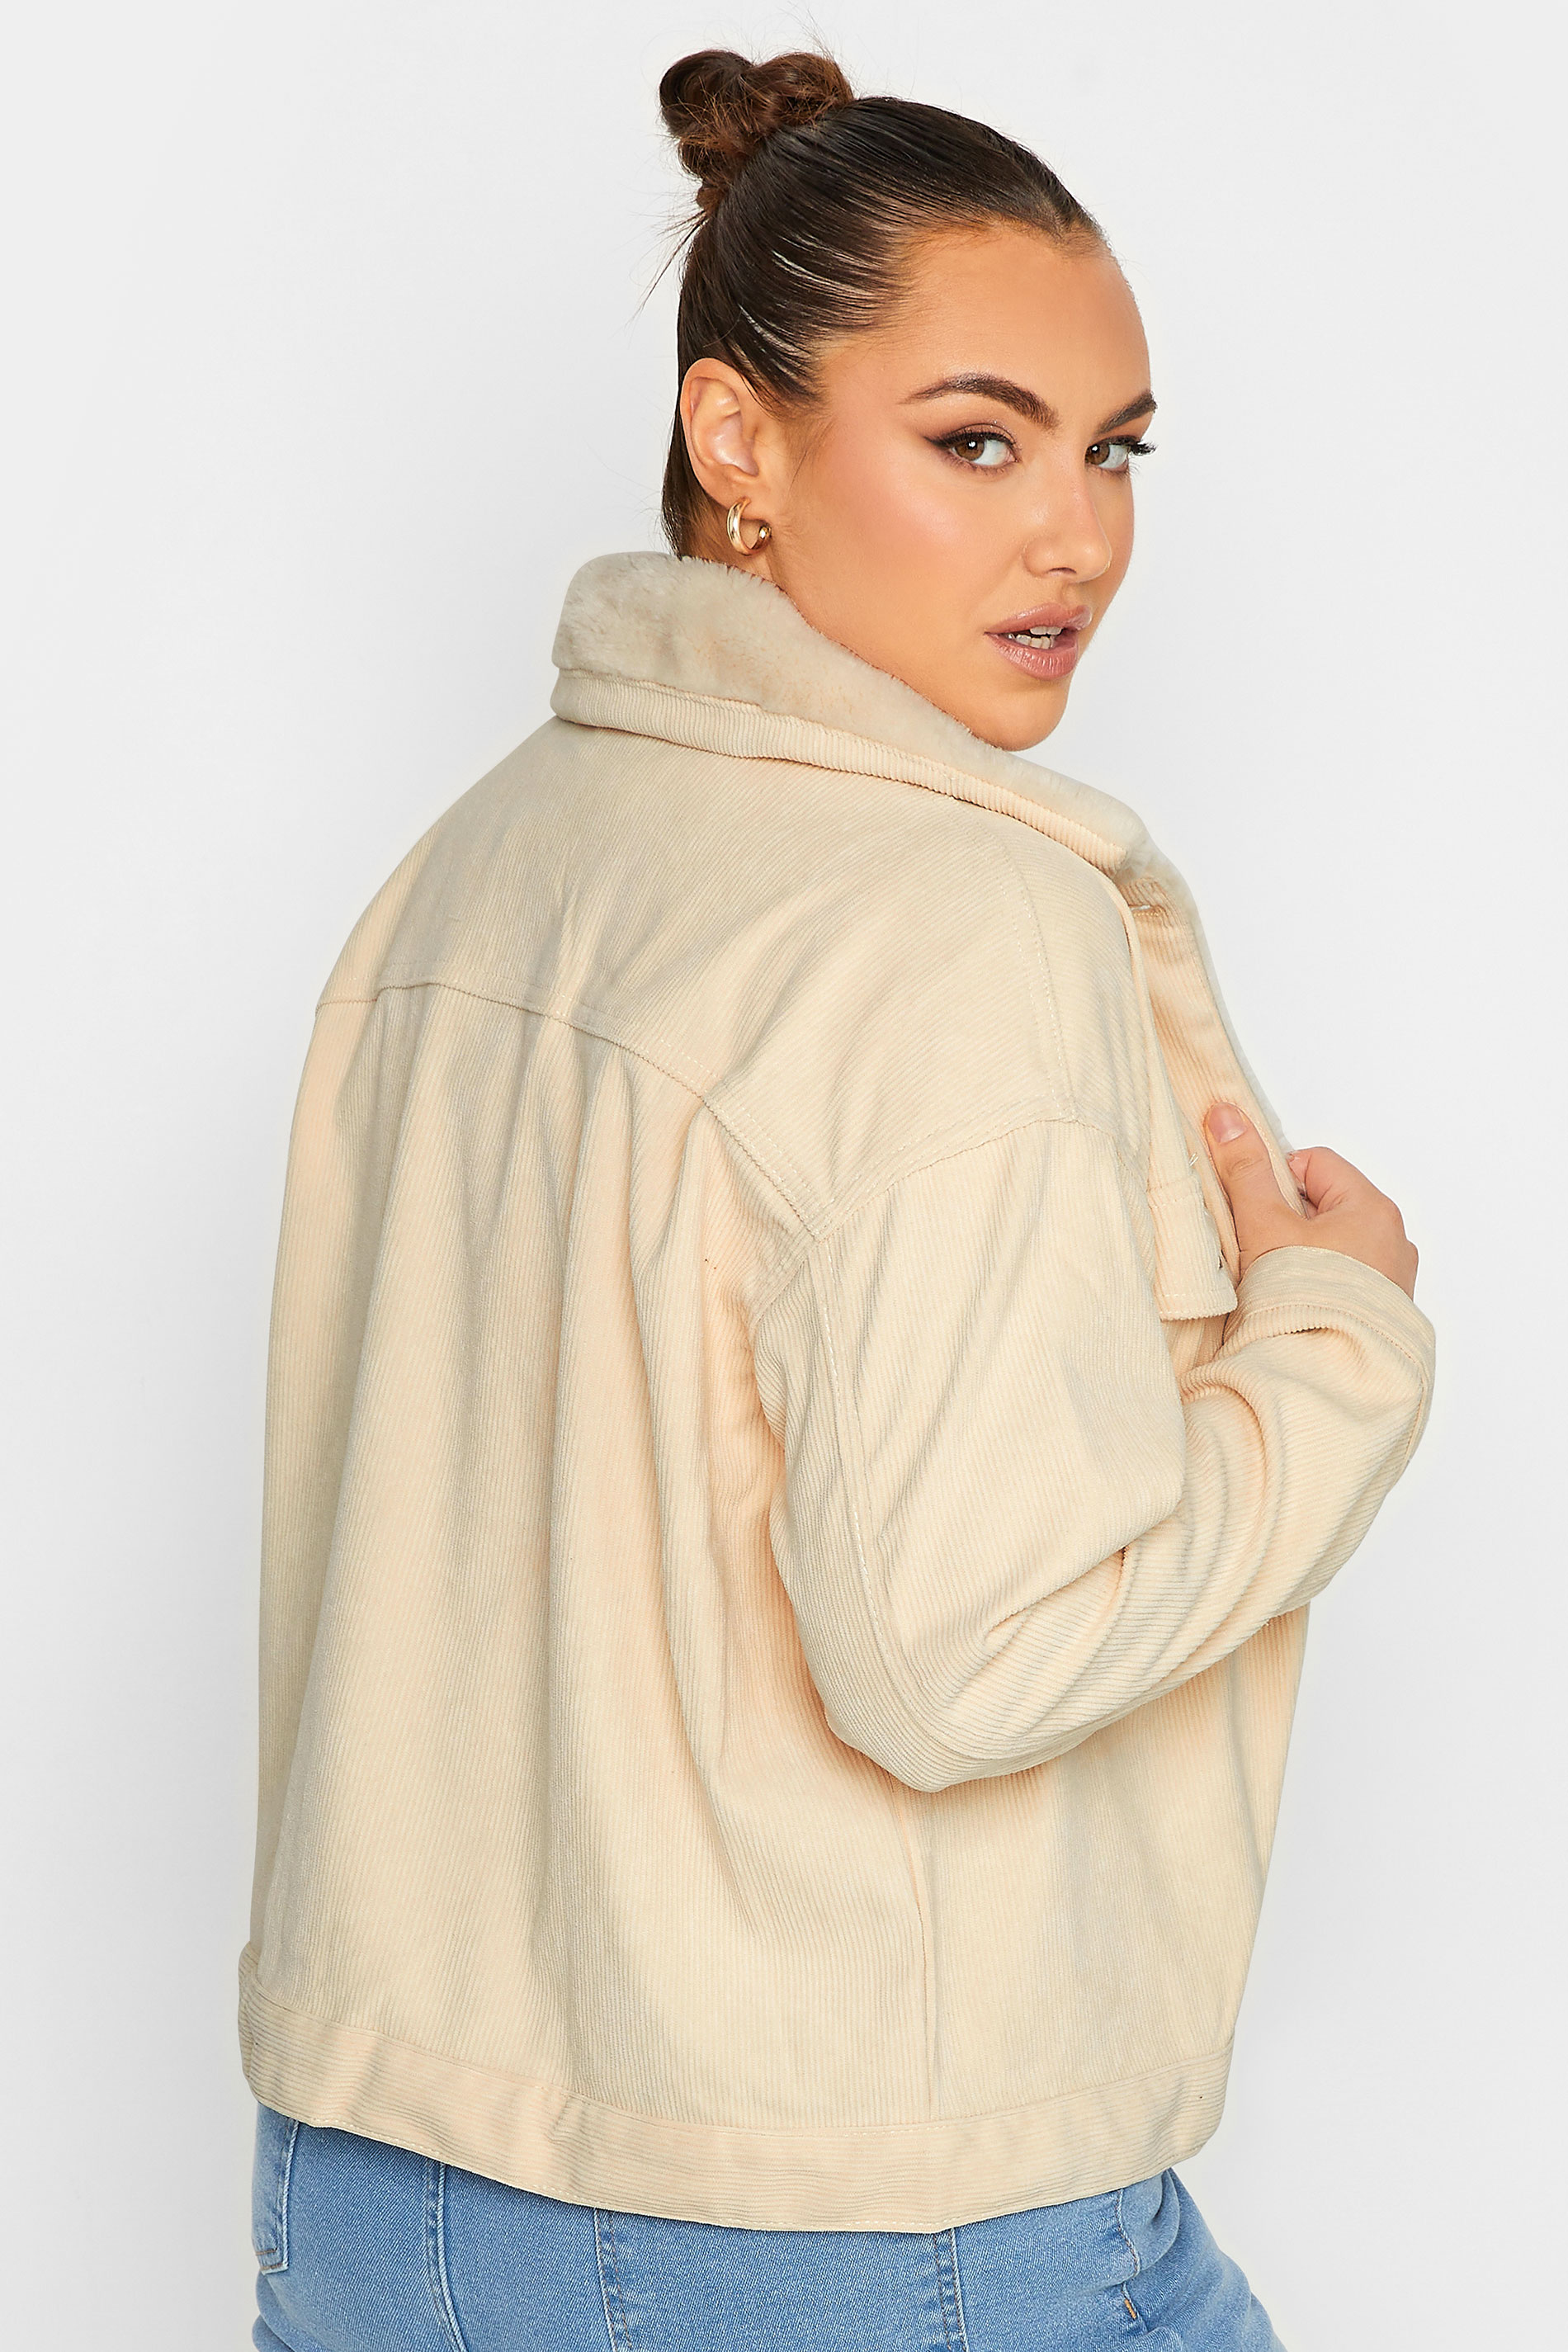 LIMITED COLLECTION Plus Size Cream Fur Collar Cord Jacket | Yours Clothing  3